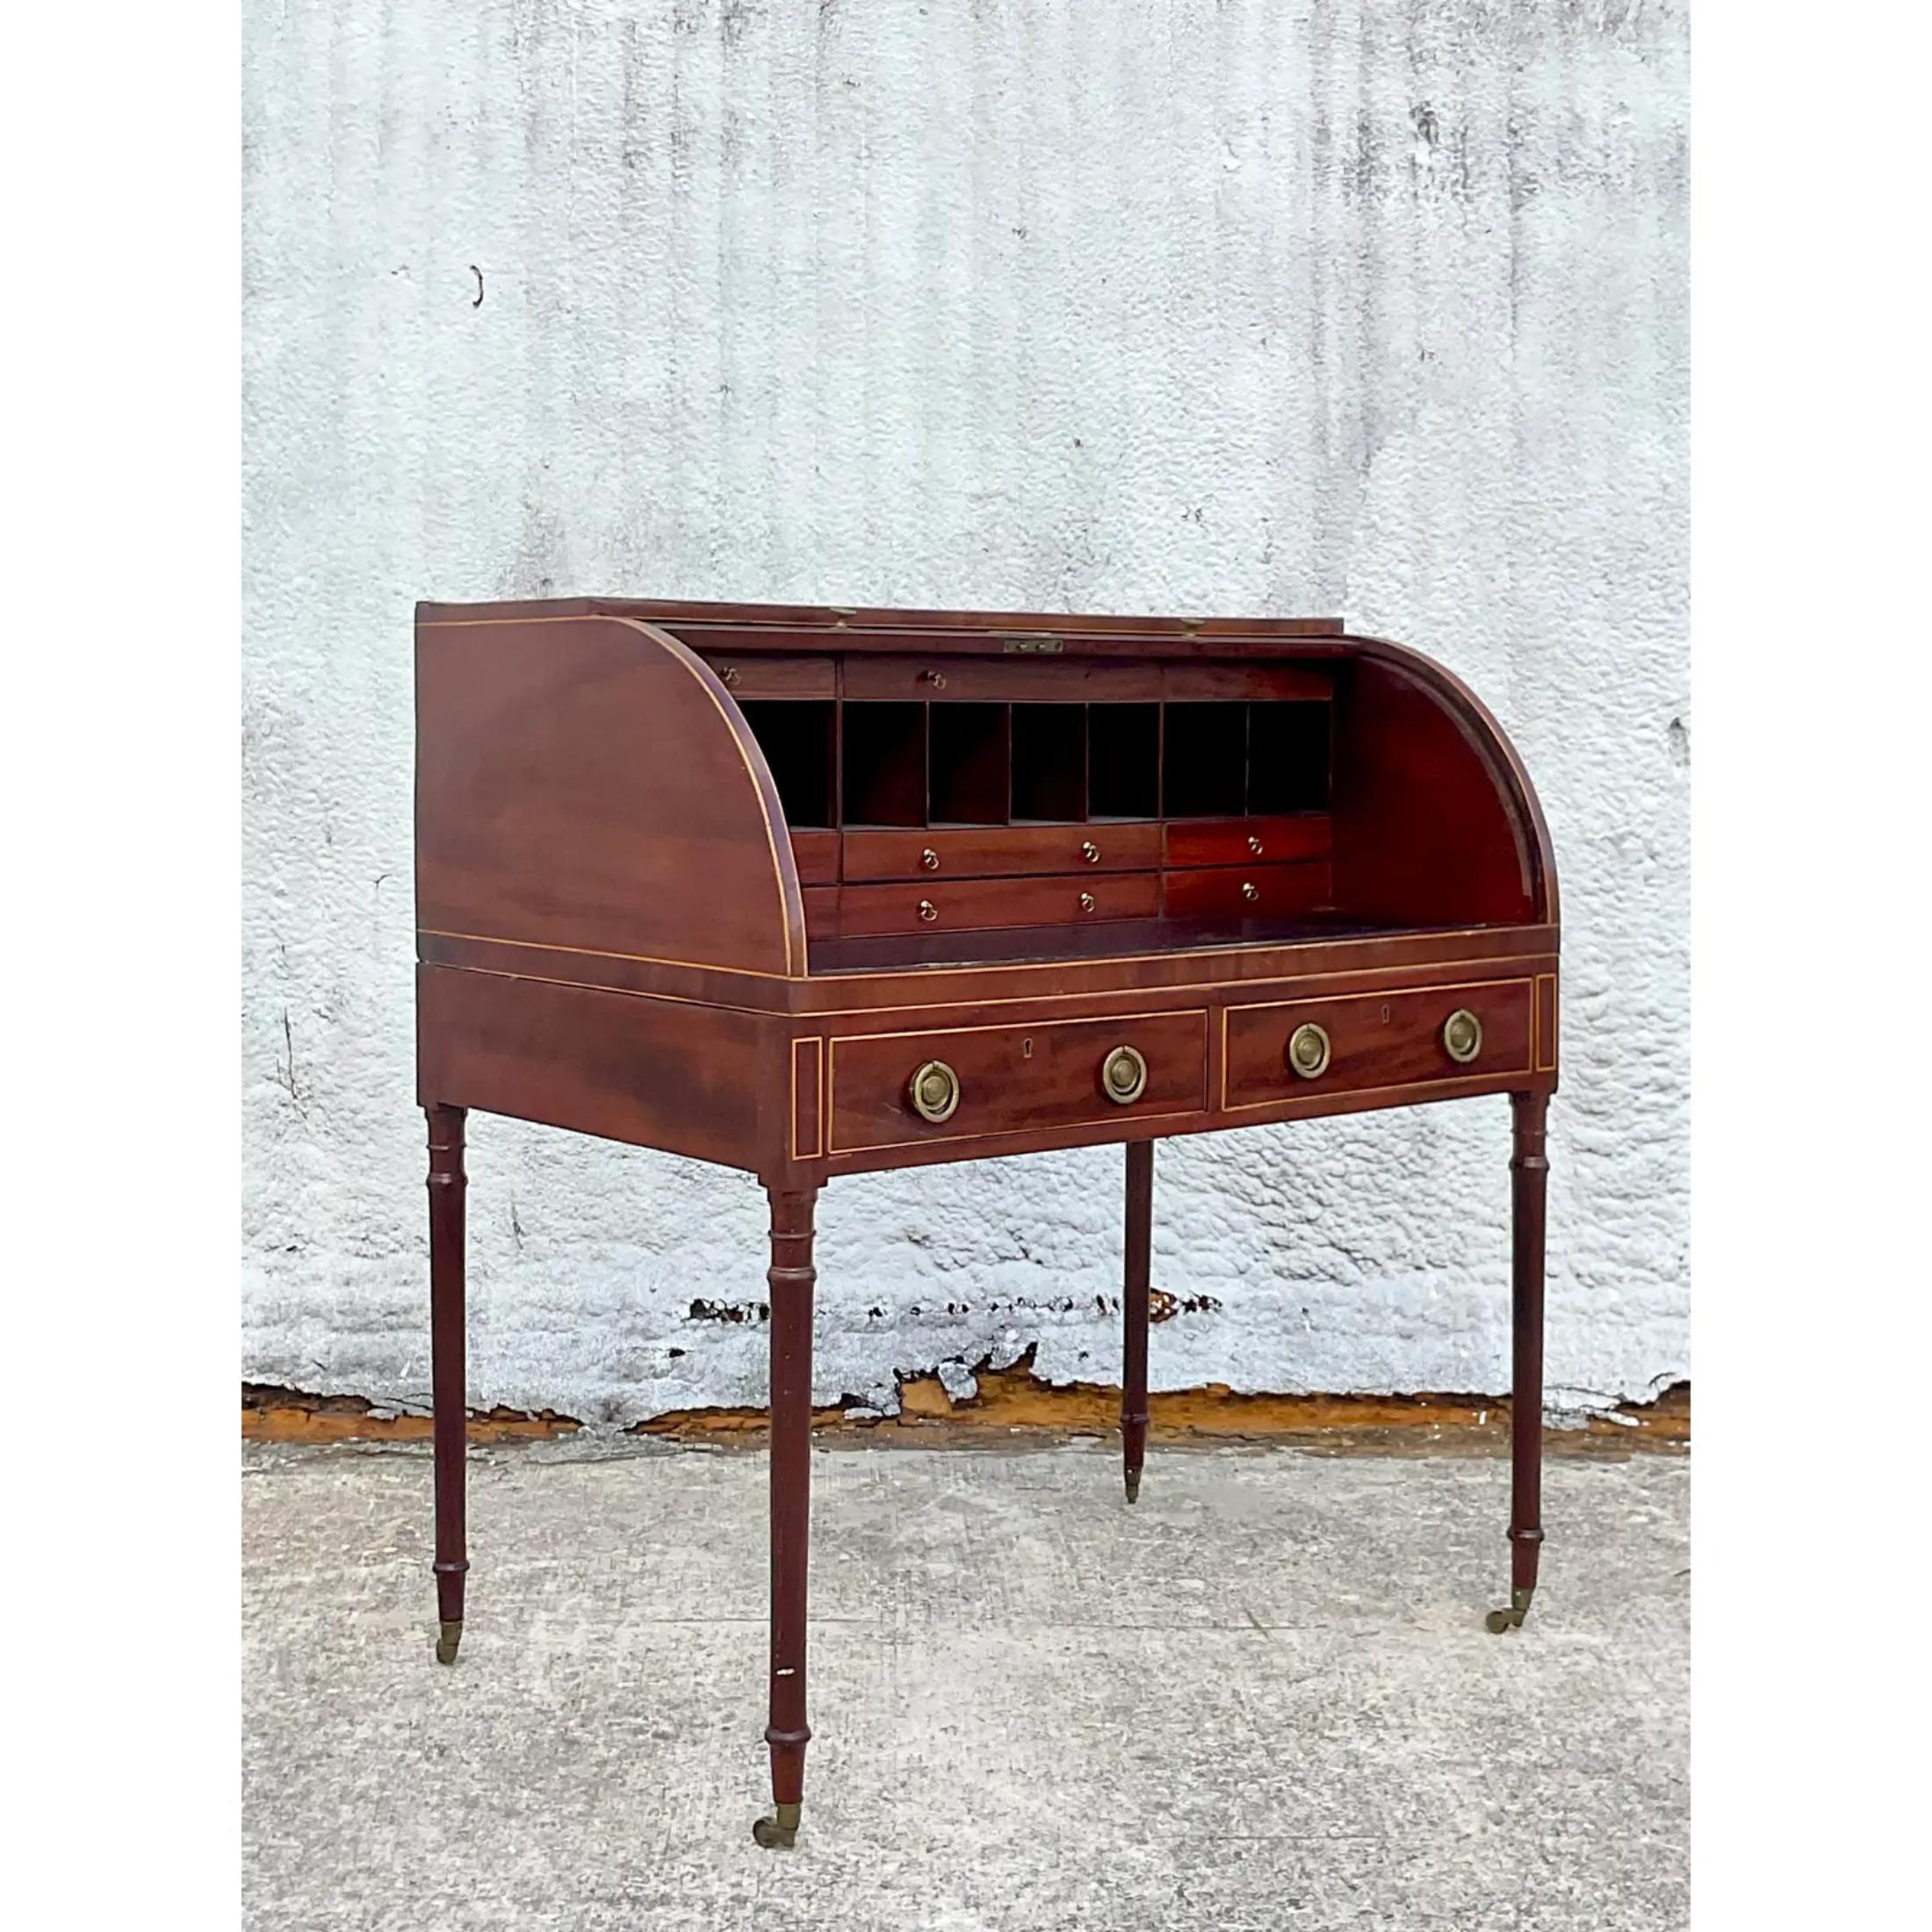 A stunning vintage Regency writing desk. A chic George III style with a chic roll top. Inlay leather writing area. Lots of little drawers and slots for organizing. A real showstopper. Acquired from a Palm Beach estate.